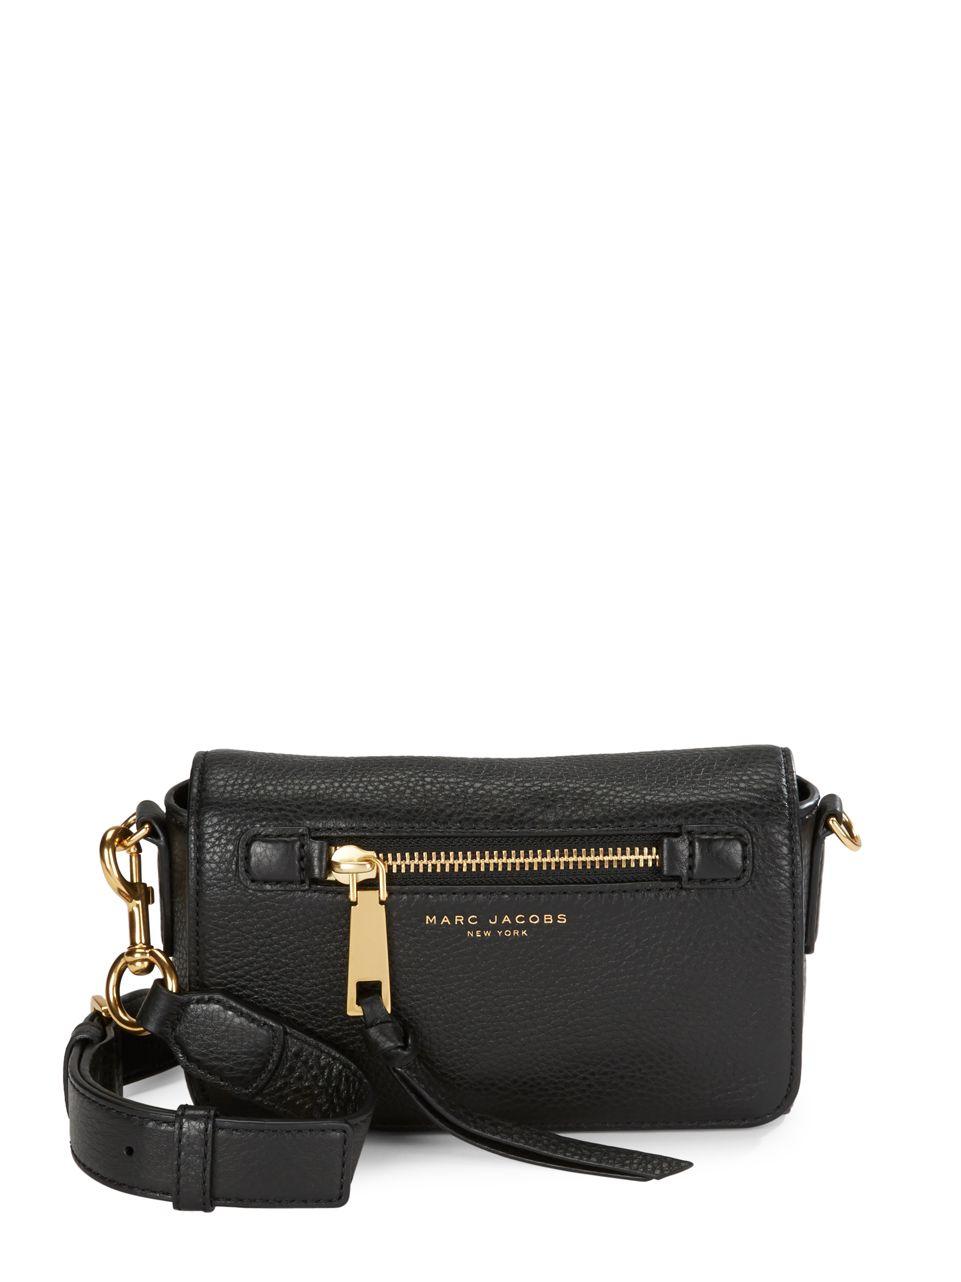 Marc jacobs Recruit Leather Crossbody Bag in Black | Lyst